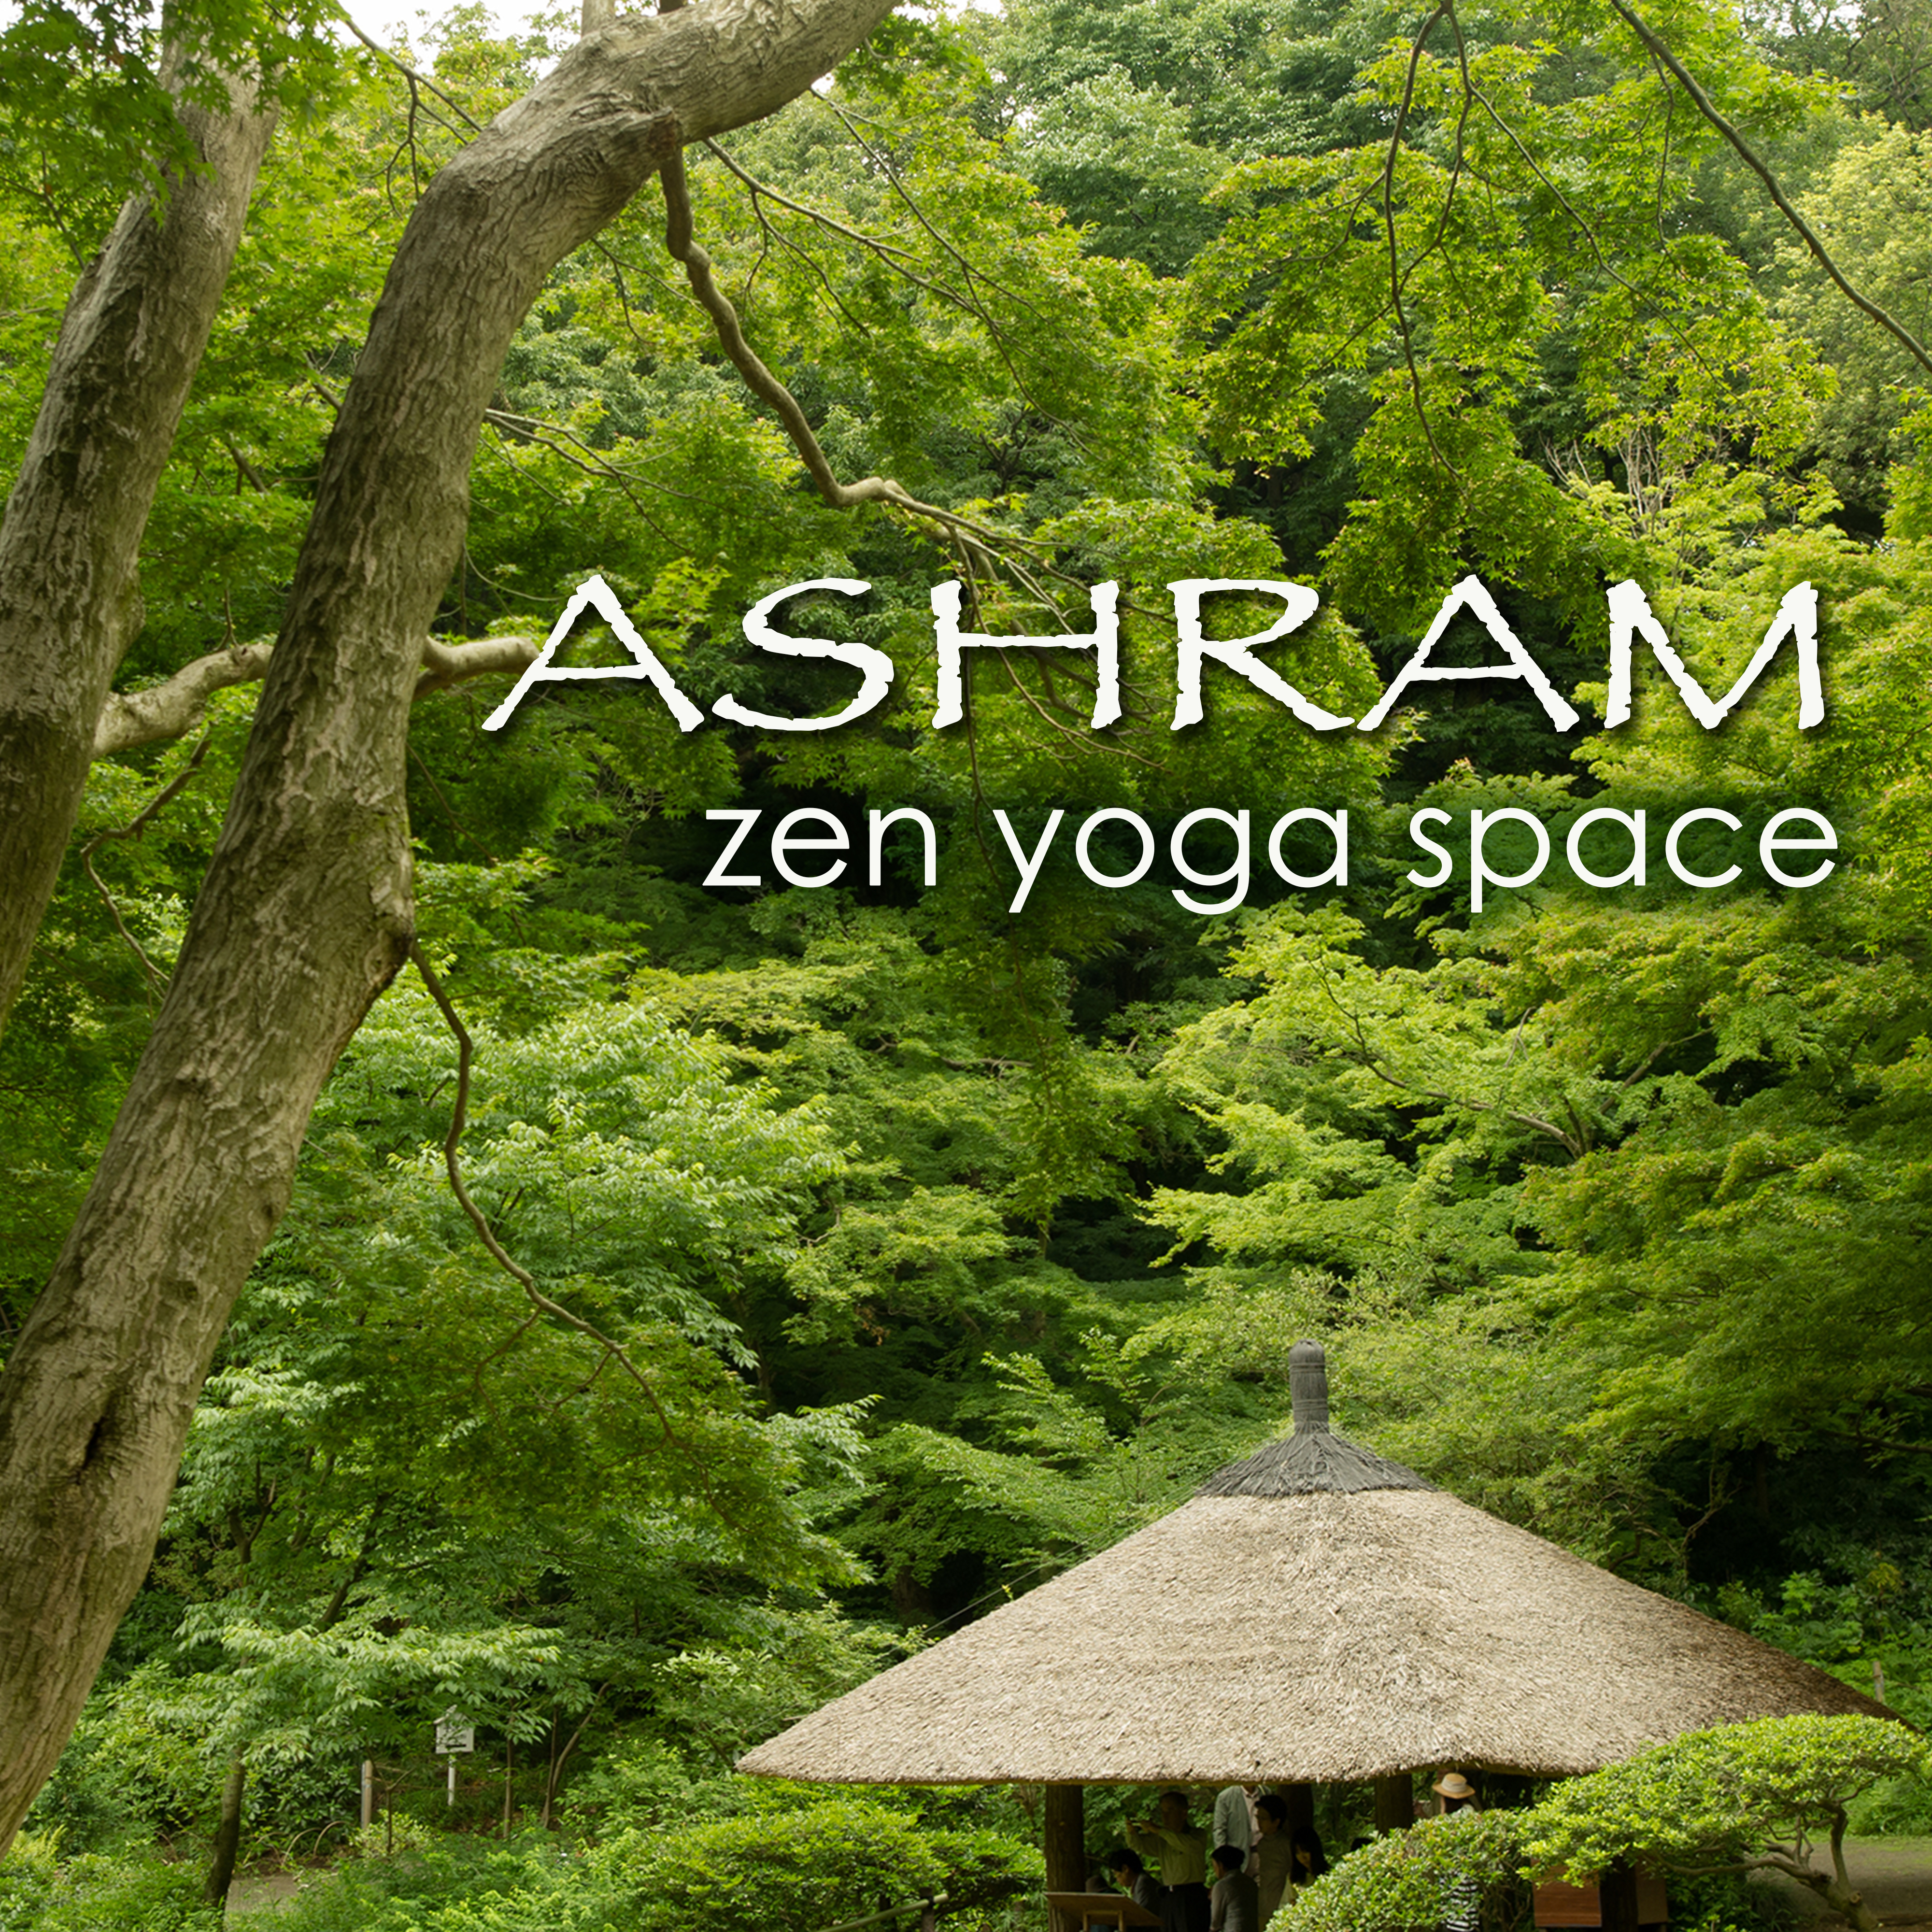 Ashram  Zen Yoga Space surrounded by Nature for Meditation, Pranayama and Yoga Classes in Peace